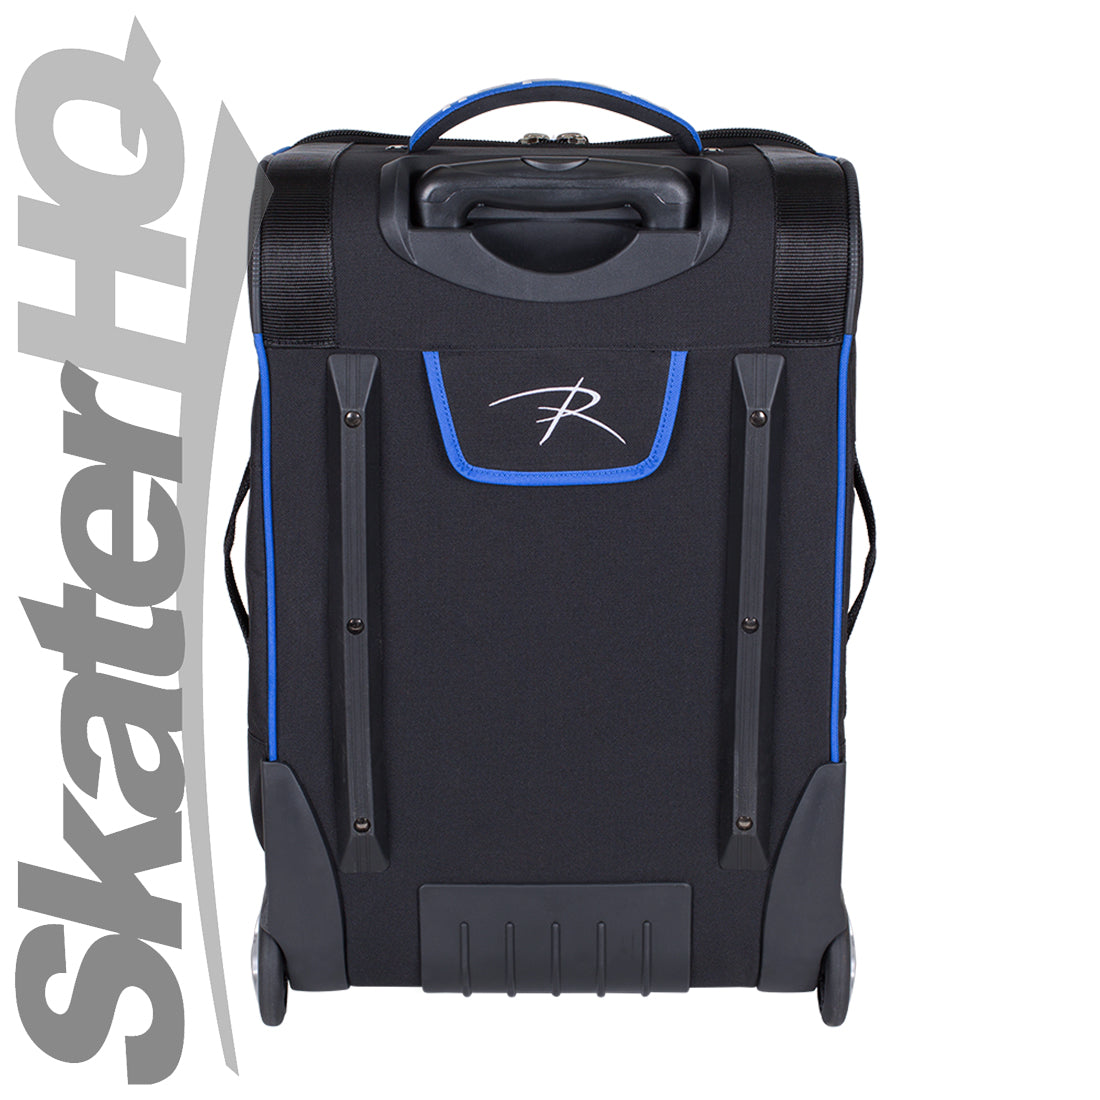 Riedell Travel Wheeled Bag - Black/Blue Bags and Backpacks